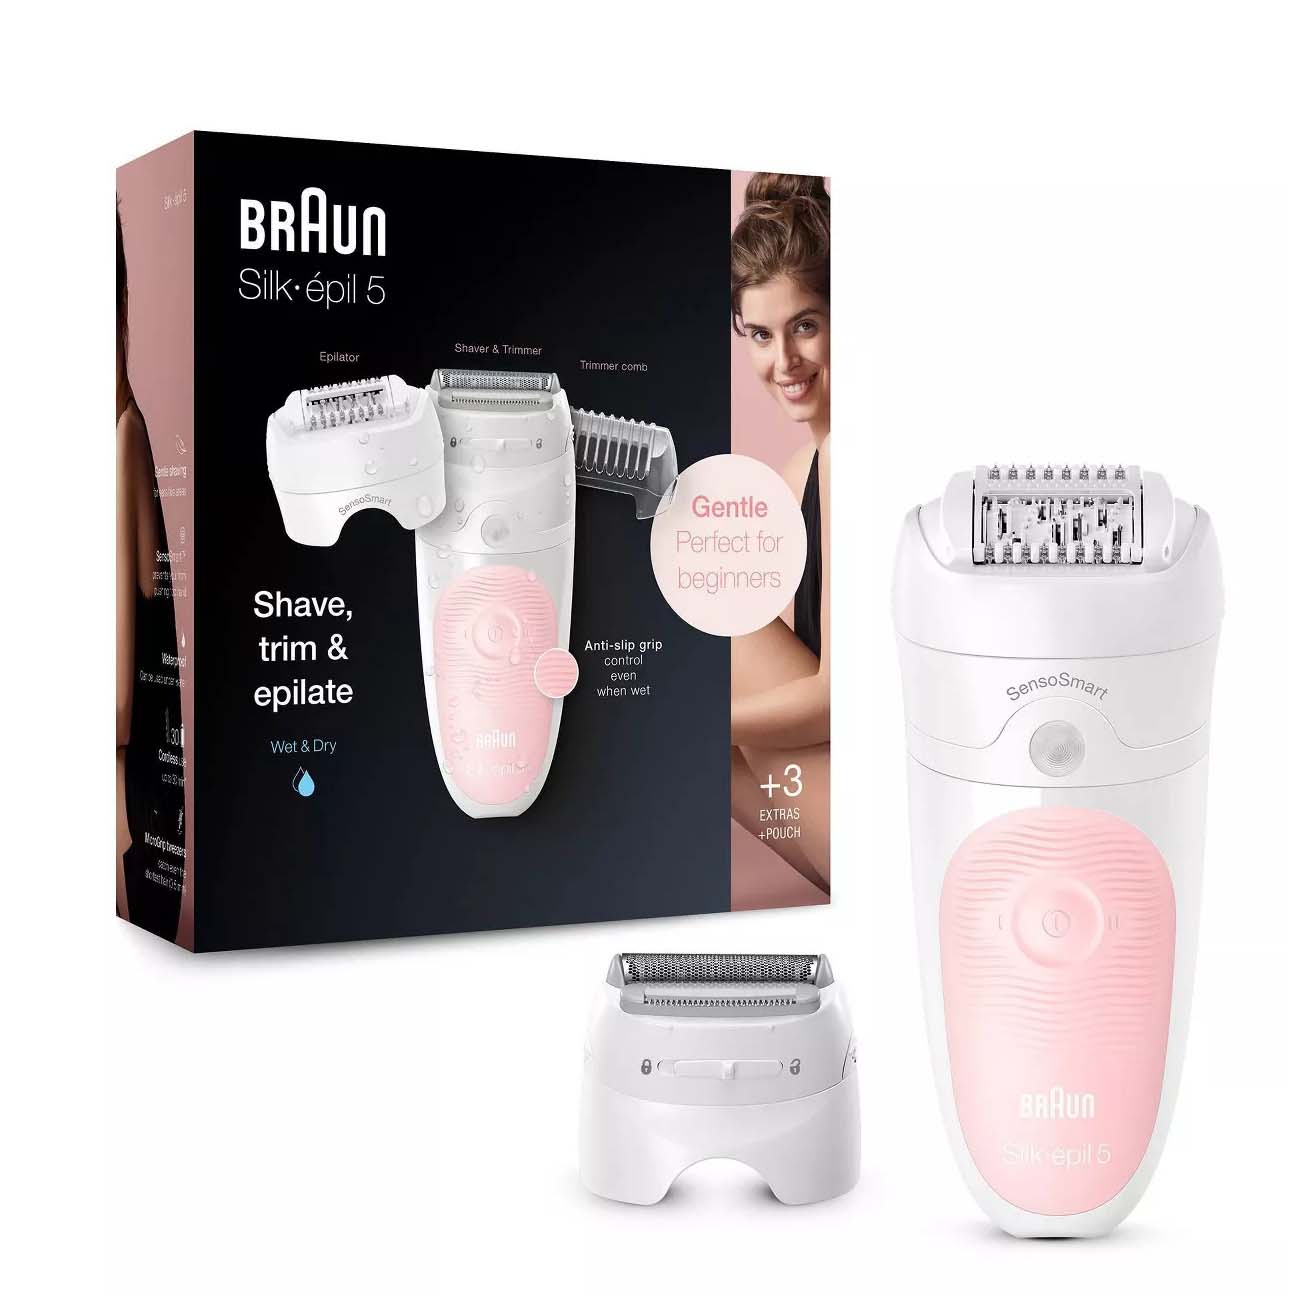 Braun Silk-epil 5-620 3-in-1 Women's Cordless Wet & Dry Epilator in white and pink with attachment